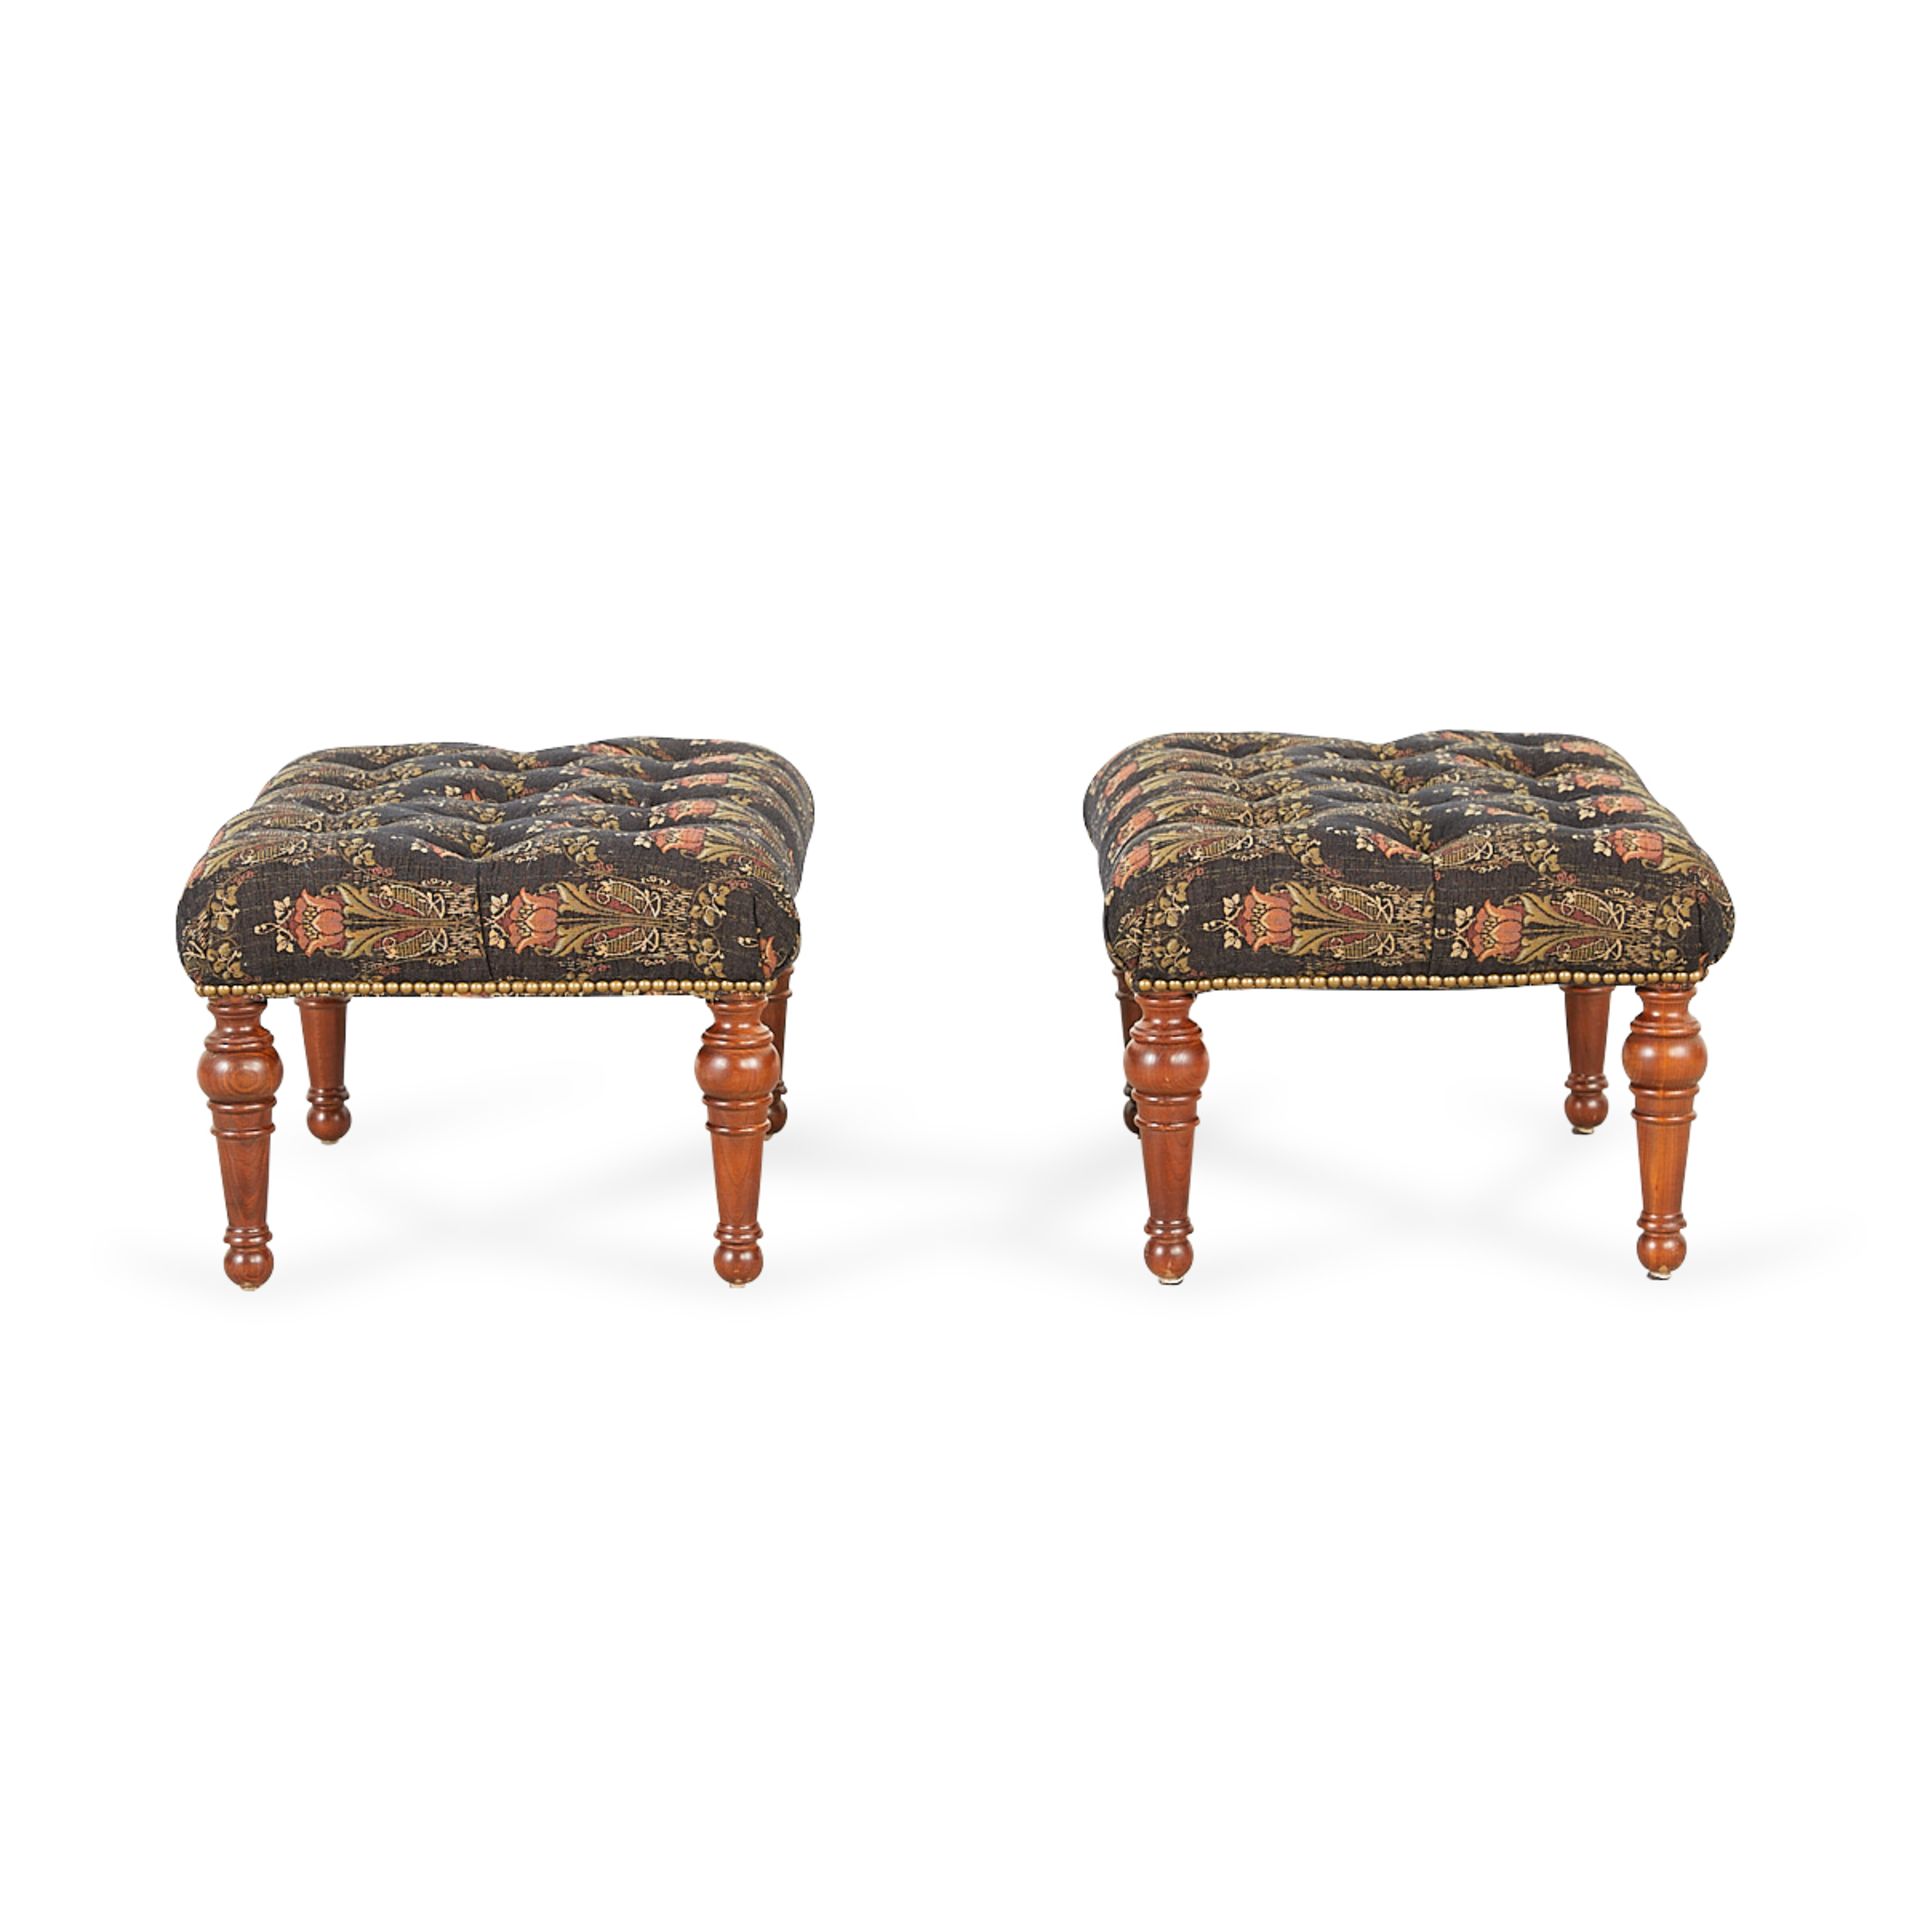 Pair of Stickley Tufted Chairs w/Ottomans - Image 18 of 22